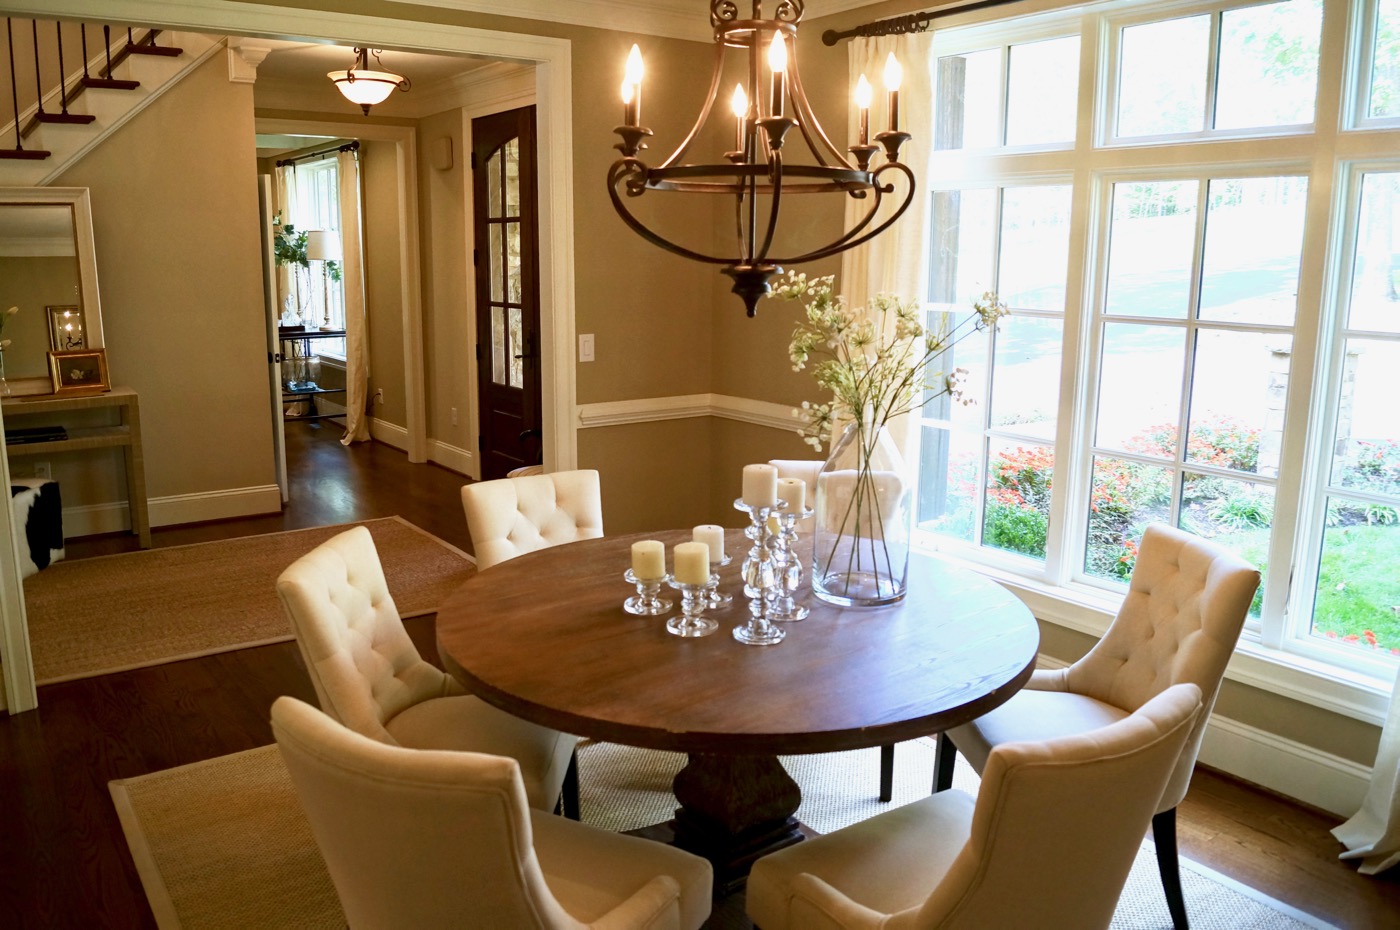 Repurpose Your Dining Room If You're Not Using It - Dominion Custom Homes